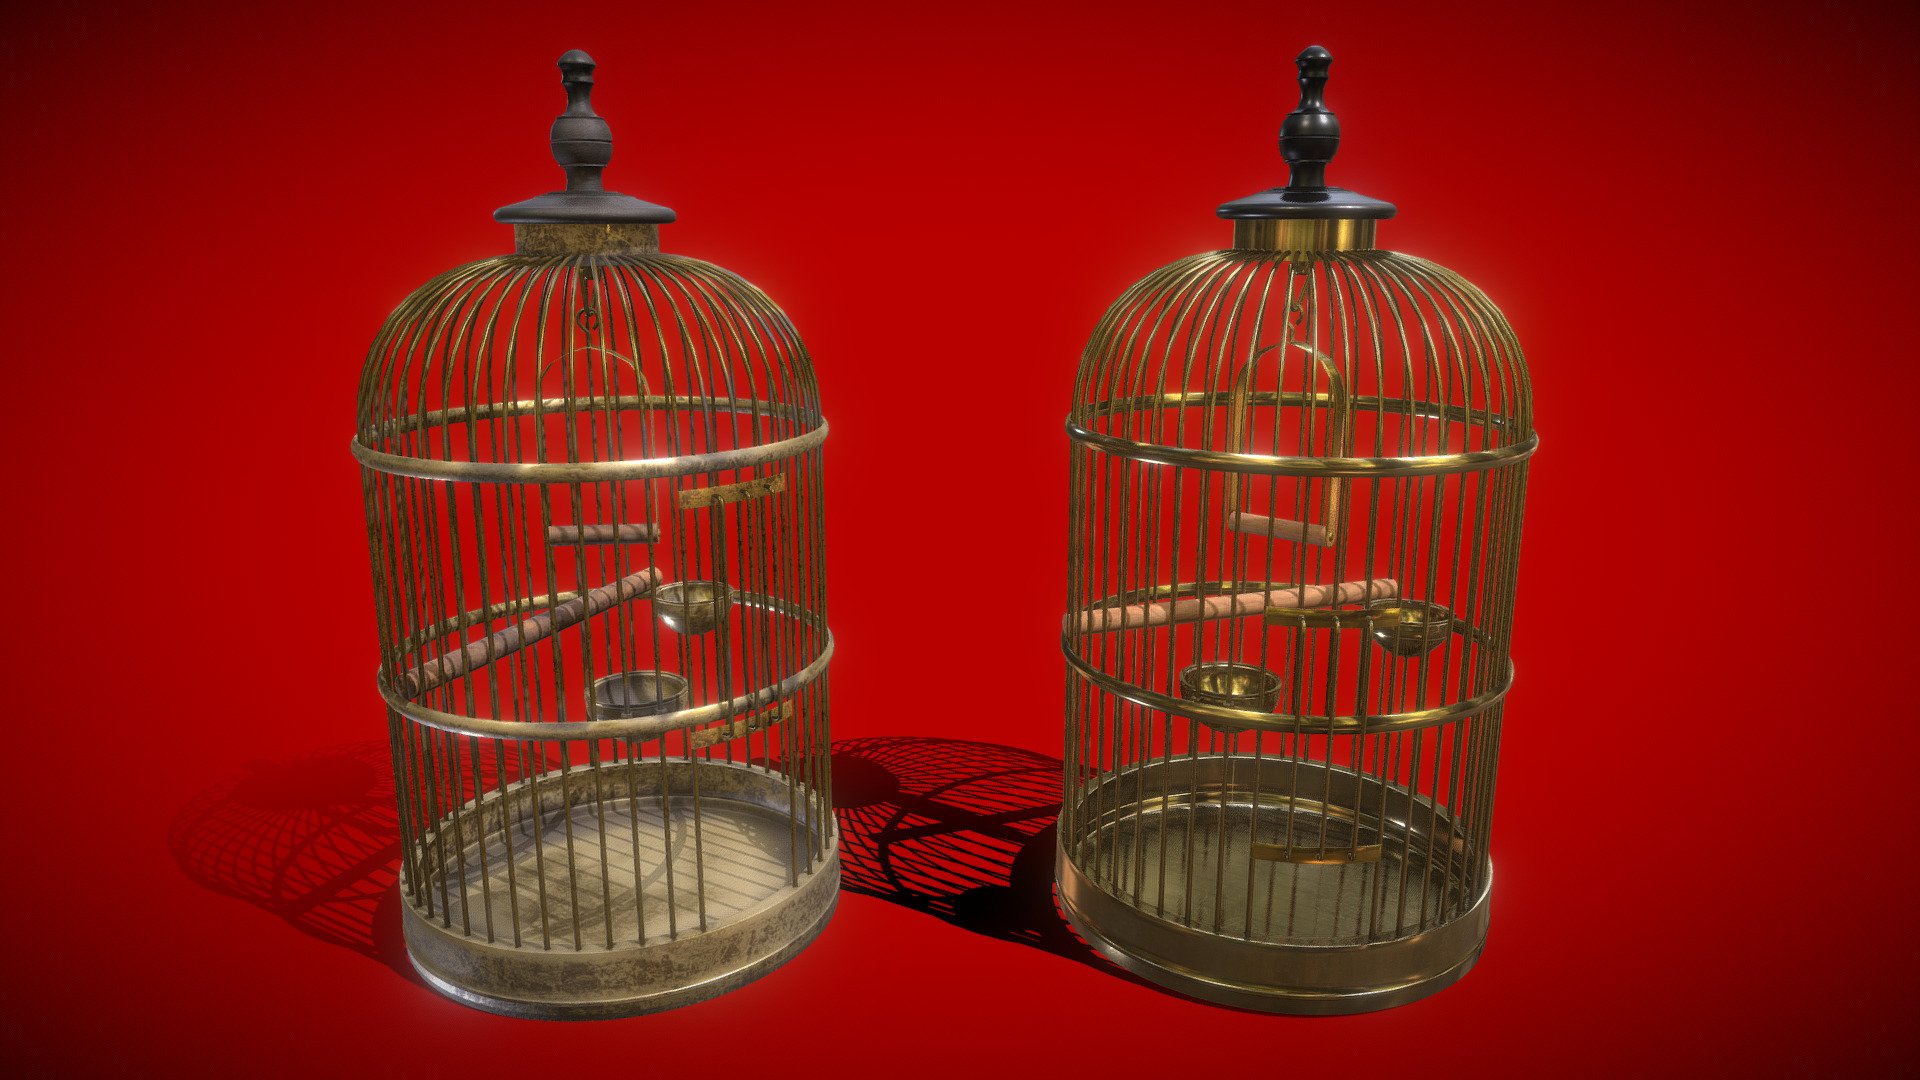 Step right up and take a look at these vintage bird cages! These beautiful props come with all the necessary features for creating an authentic and immersive digital world. With UV mapping, diffuse, metallness, normal map, and roughness map, you can create stunningly realistic cages in your video game, VR, or photorealistic projects. The addition of ambient occlusion (AO) further enhances the depth and realism of the cages, ensuring that they look stunning in any lighting conditions. These vintage bird cages are the perfect way to add a touch of old-fashioned charm to your digital world.

Game Ready - Vintage Bird cage [High Detail] - Buy Royalty Free 3D model by PlayTheMaster 3d model